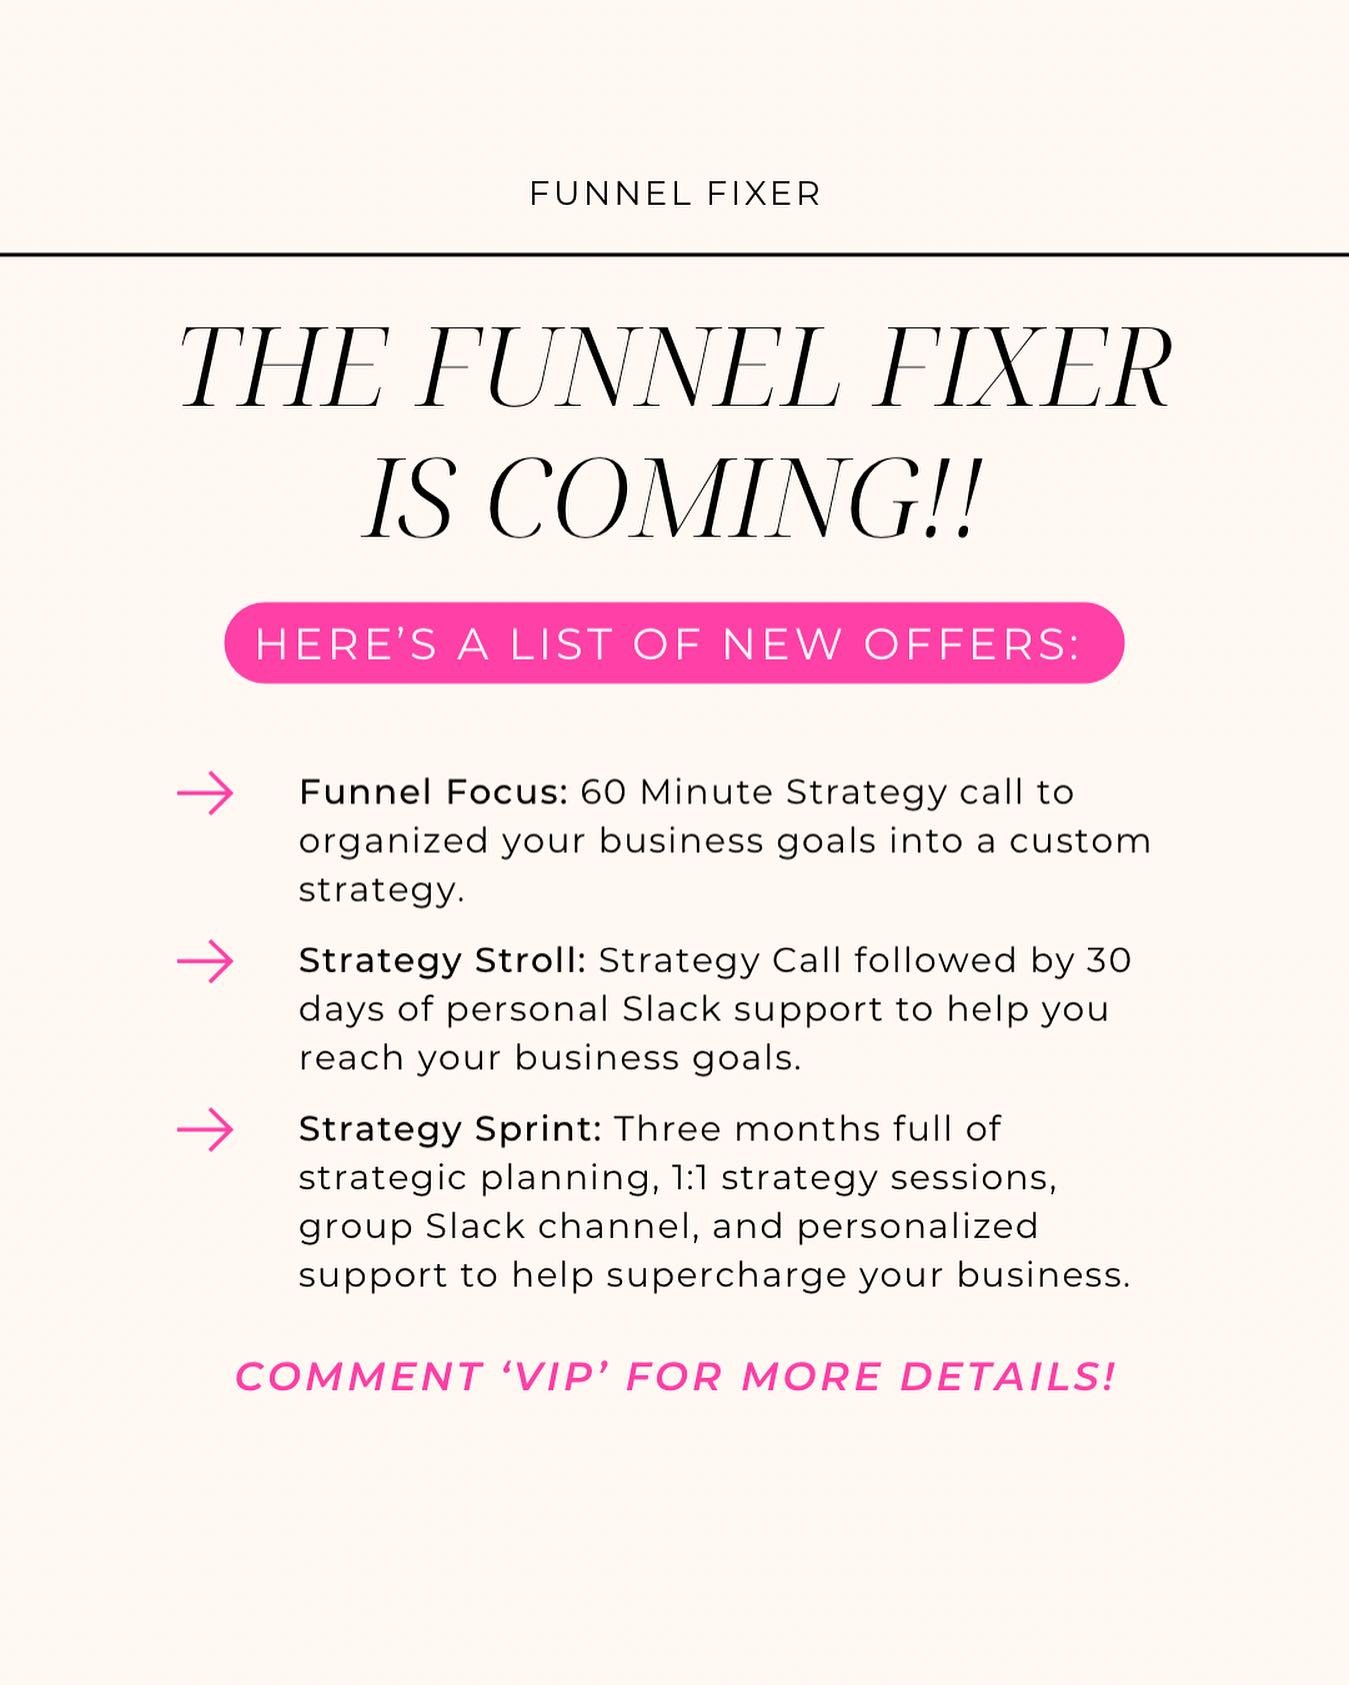 🌟 Exciting News! 🌟 

I&rsquo;ve got not one, not two, but THREE amazing new offers hitting the site tomorrow to help you elevate your business and crush your goals! 💪

1️⃣ Funnel Focus: In just 60 minutes, we&rsquo;ll create a custom marketing fun